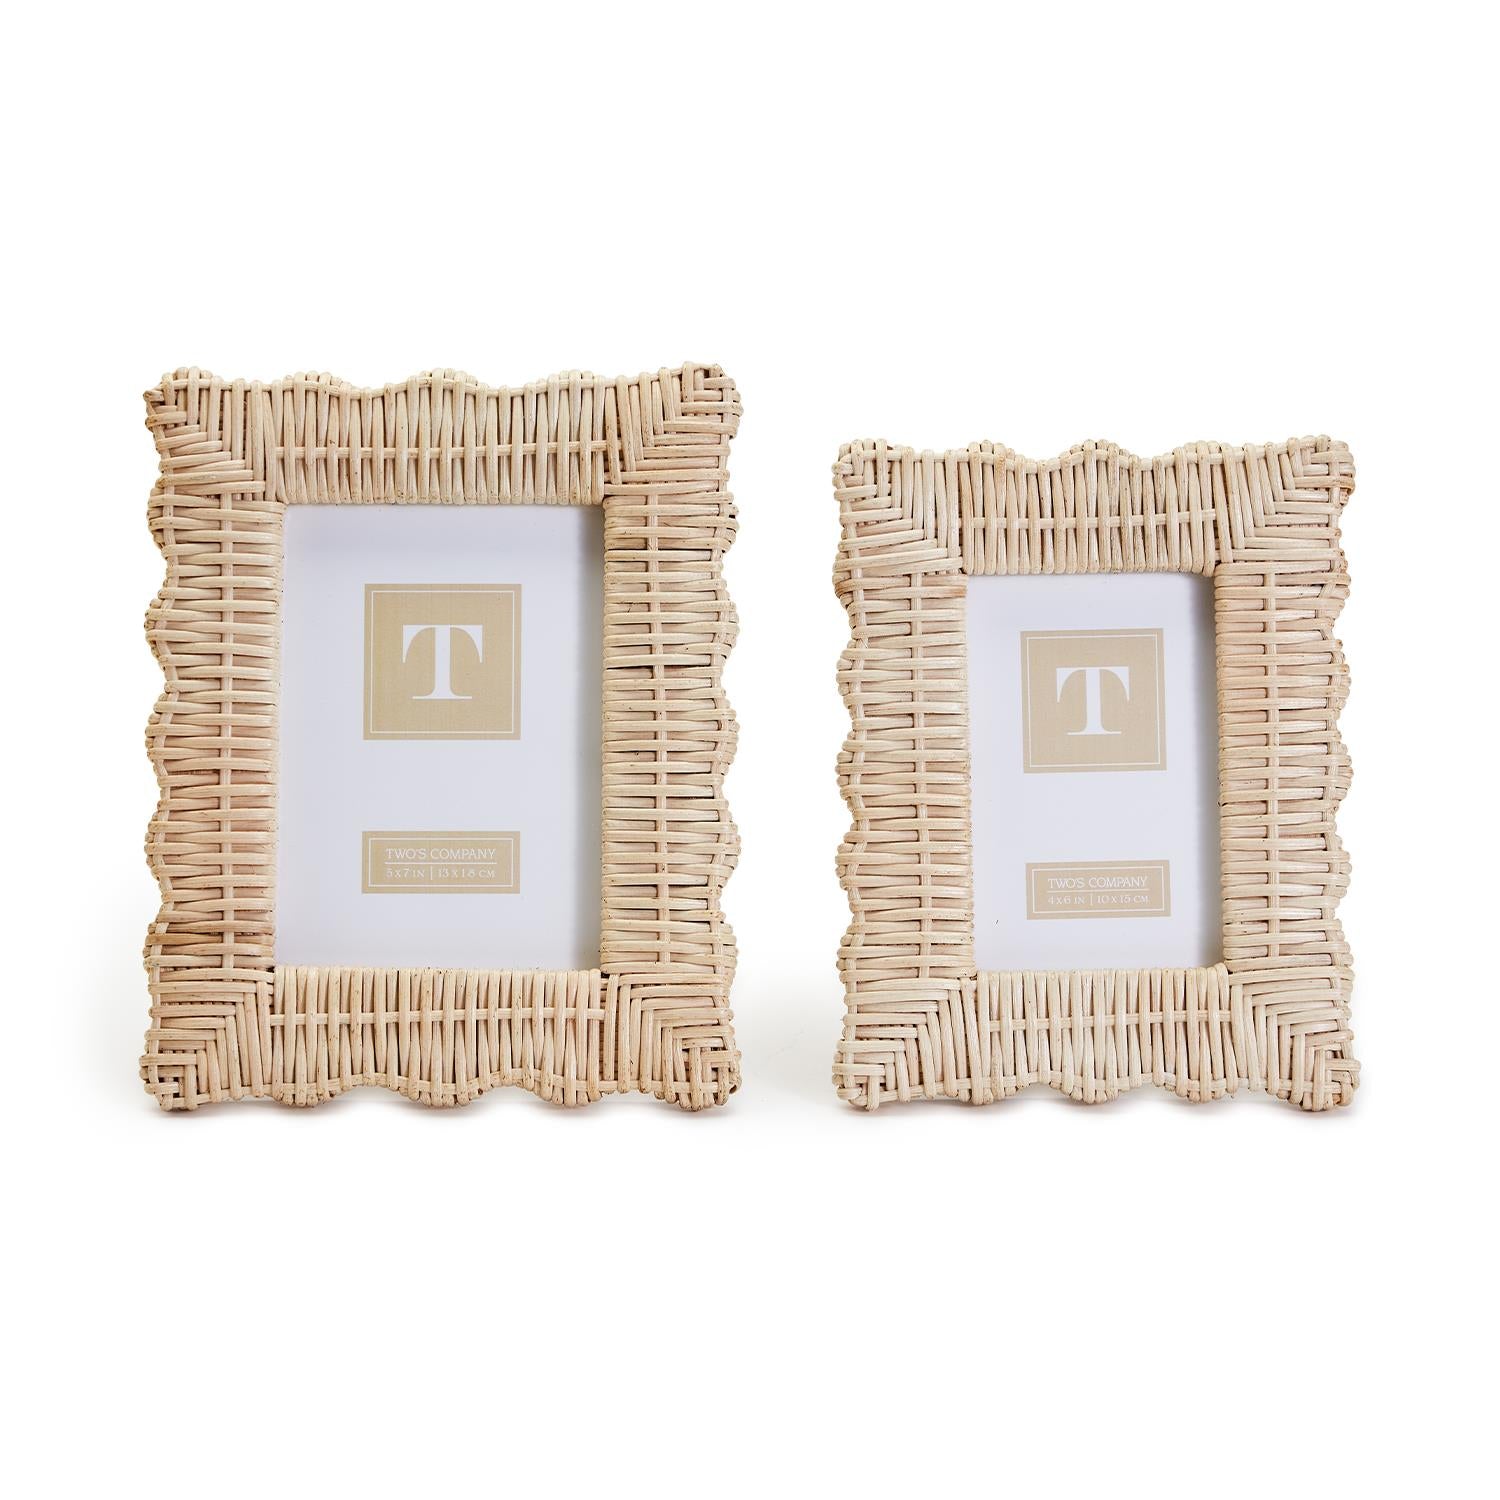 Wicker Weave Frame - 4x6 Home Decor Two's Company   